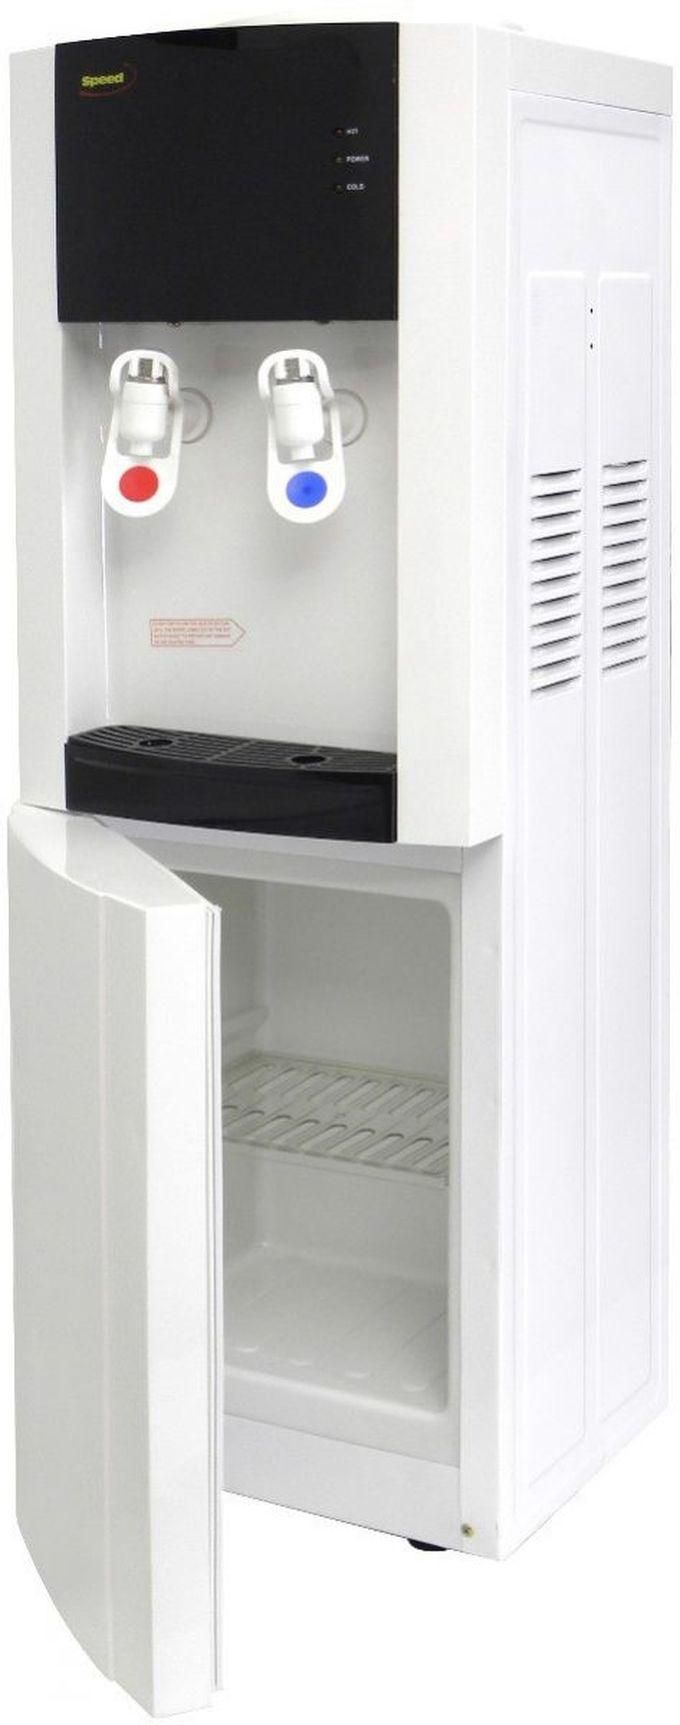 SPEED Water Dispenser With Cabinet - White